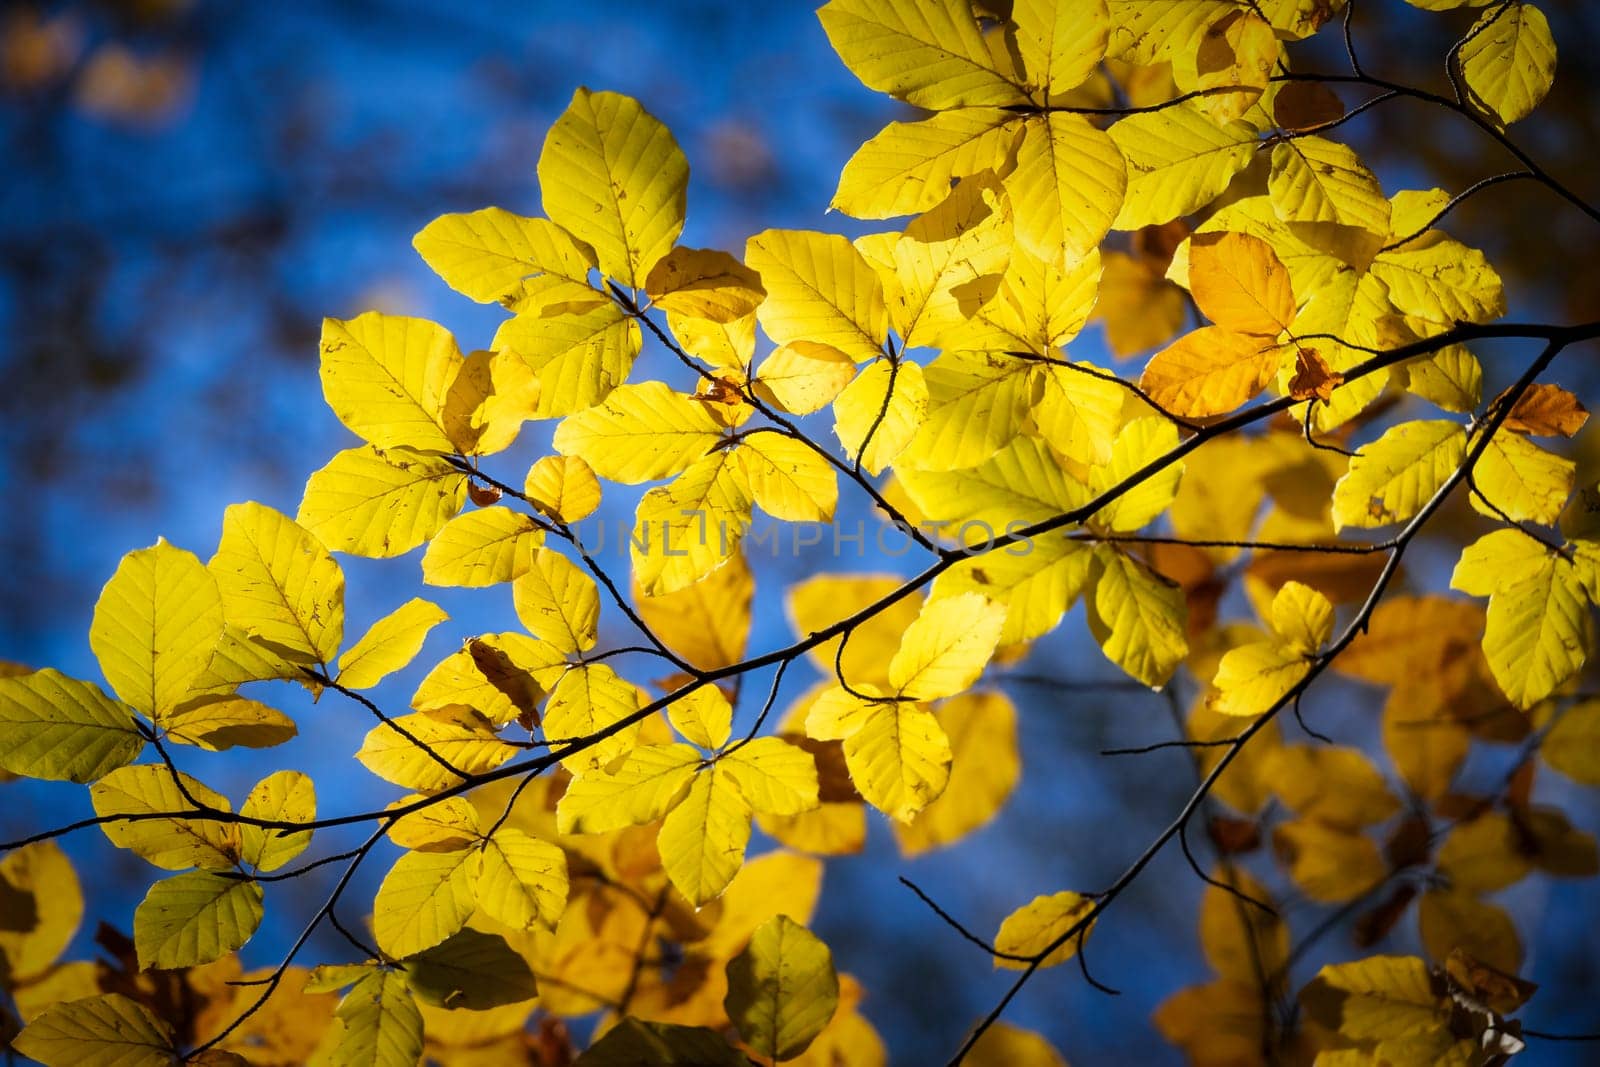 Beech tree with beautiful orange leaves outdoors on sunny autumn day by Digoarpi